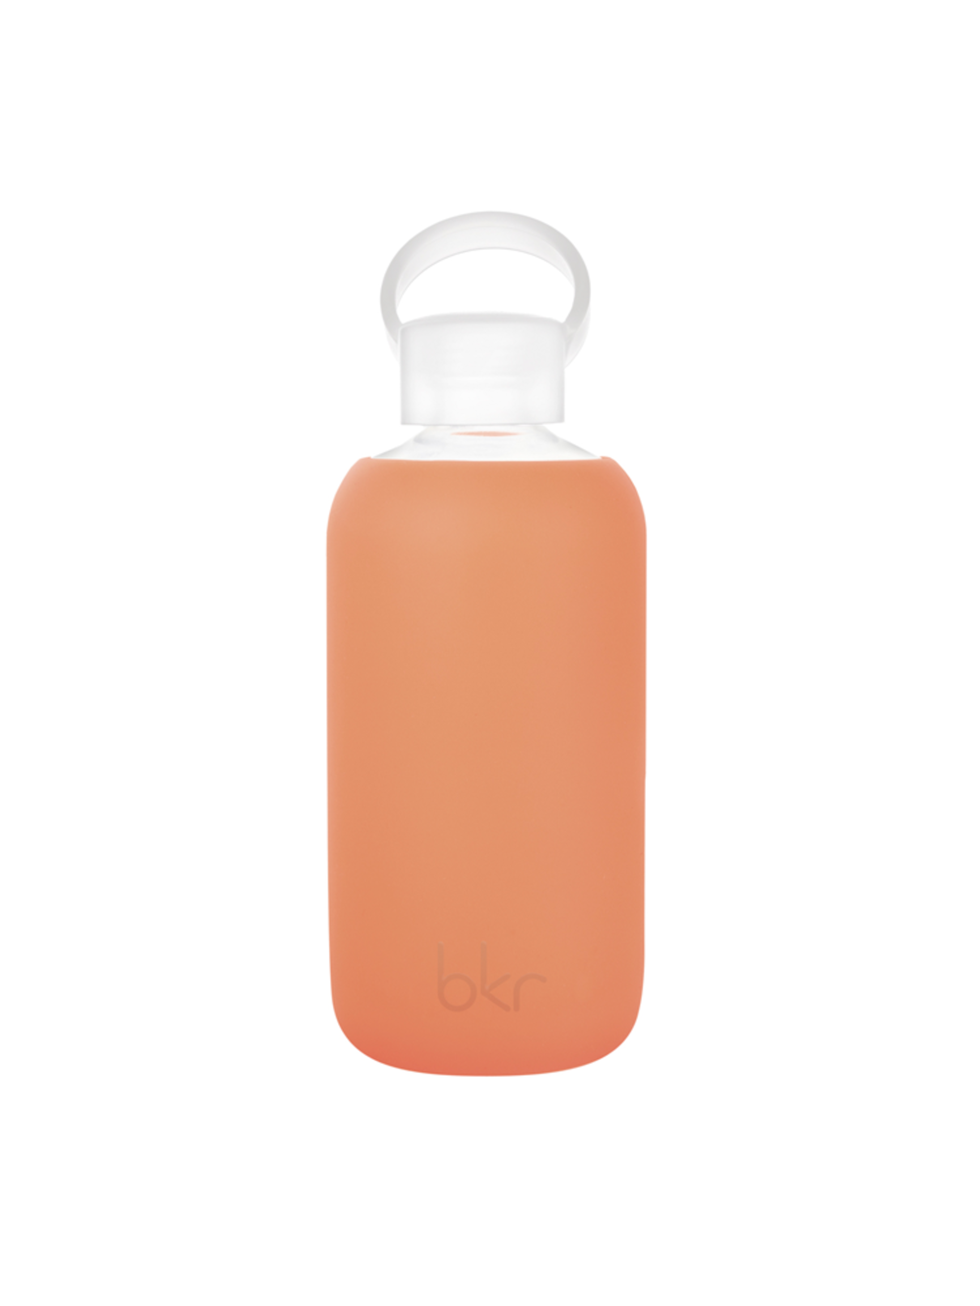 <p><strong>BKR </strong></p>

<p>Bkr is your new season essential: with colourways that evolve alongside the runway, this little glass bottle will have you drinking double. No-slip, easy to carry and bewilderingly satisfying to drink from</p>

<p>BKR 500m